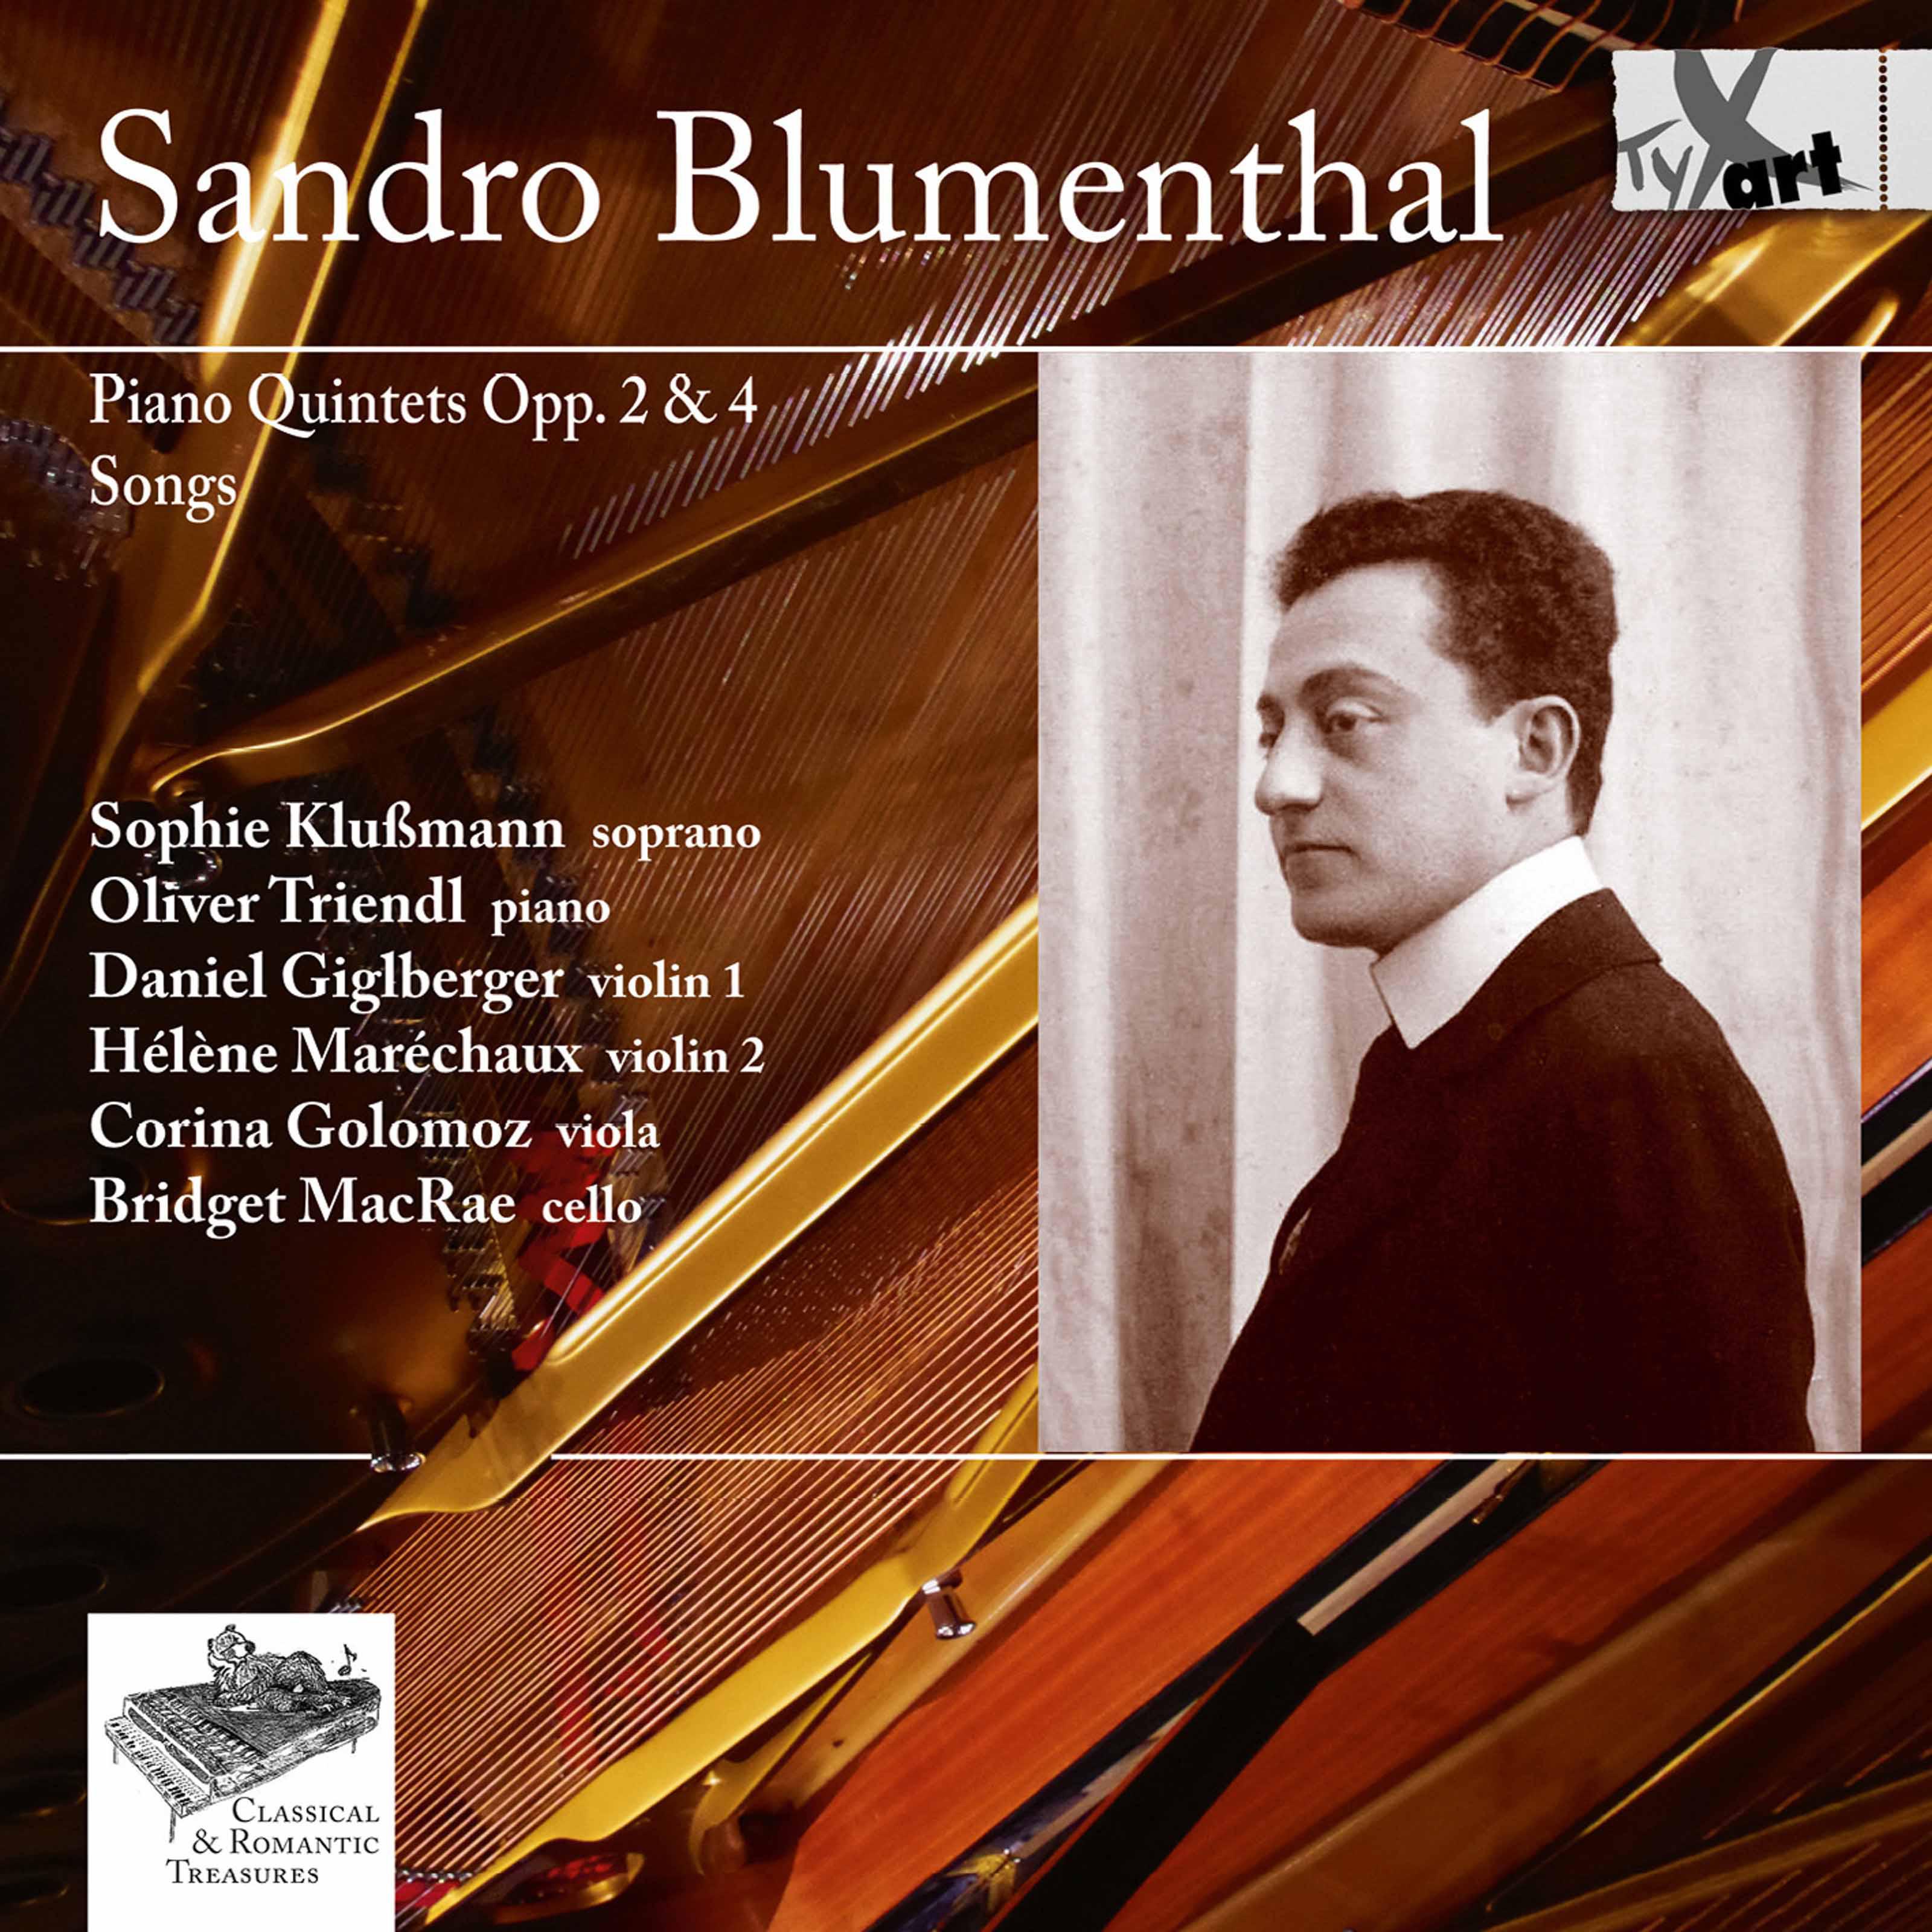 Blumenthal: Piano Quintets Opp. 2 & 4 and 4 Songs